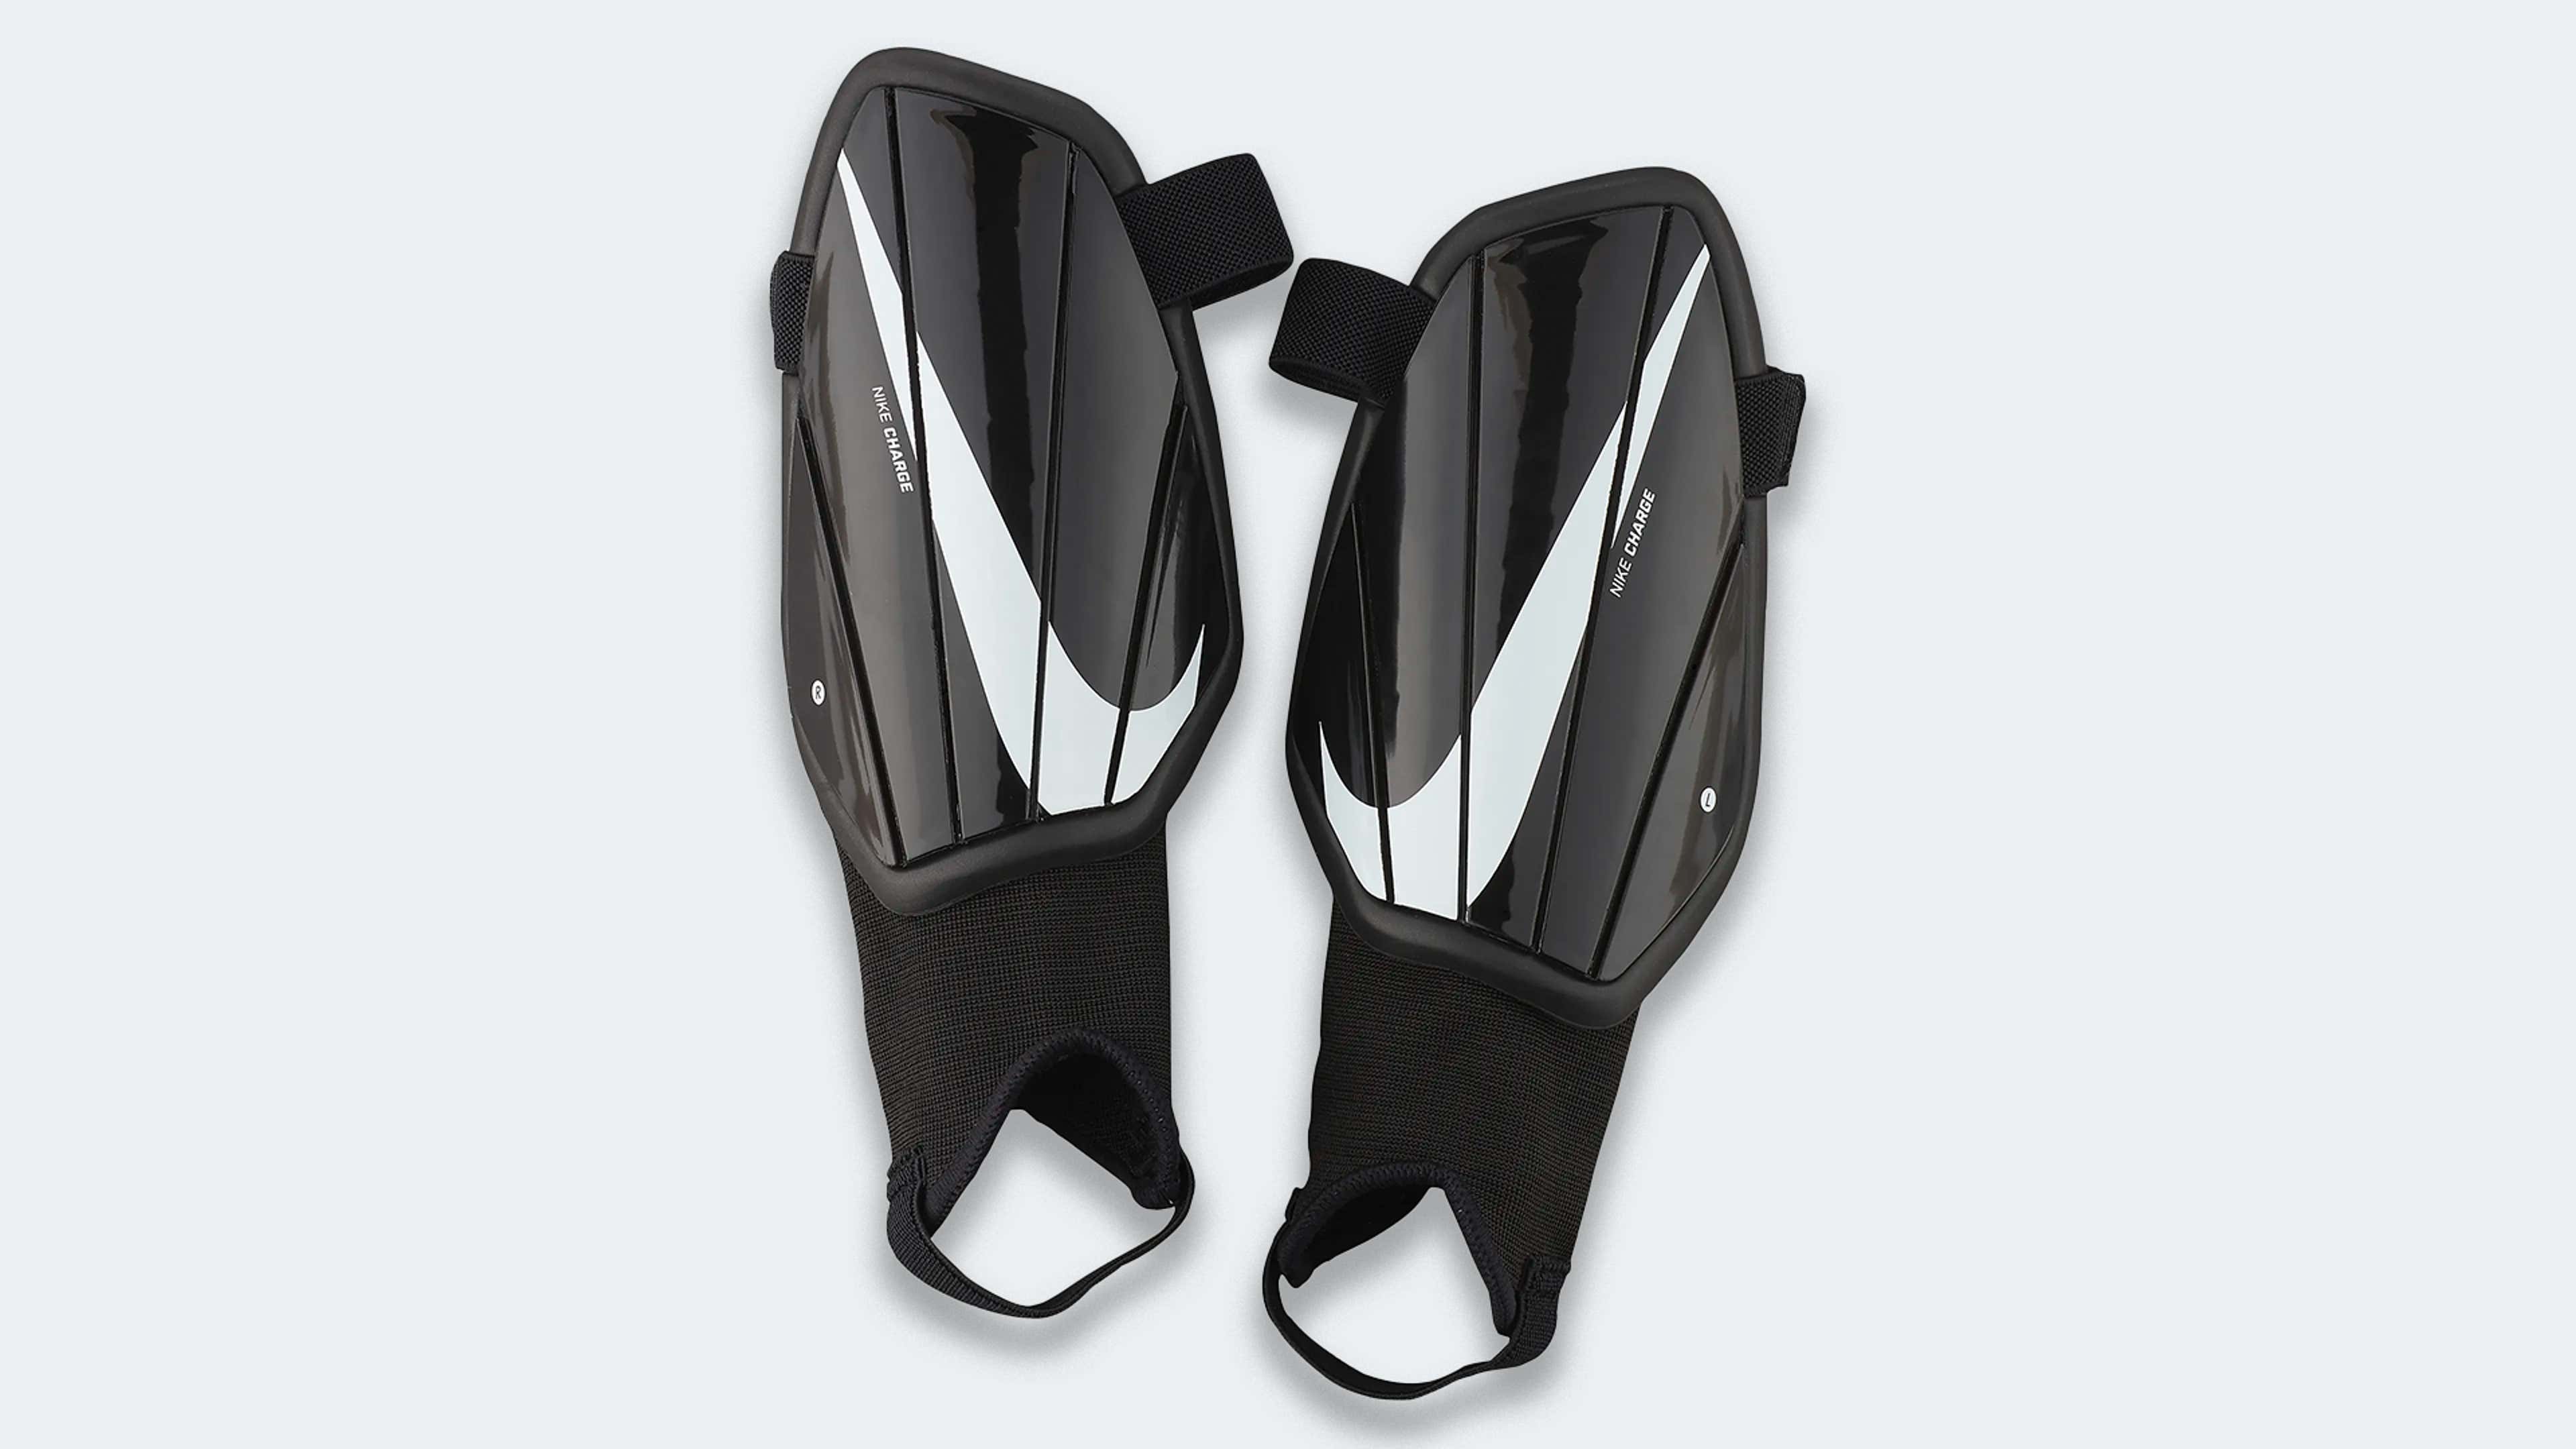 High quality, durable and ligthweight professional shin guard.